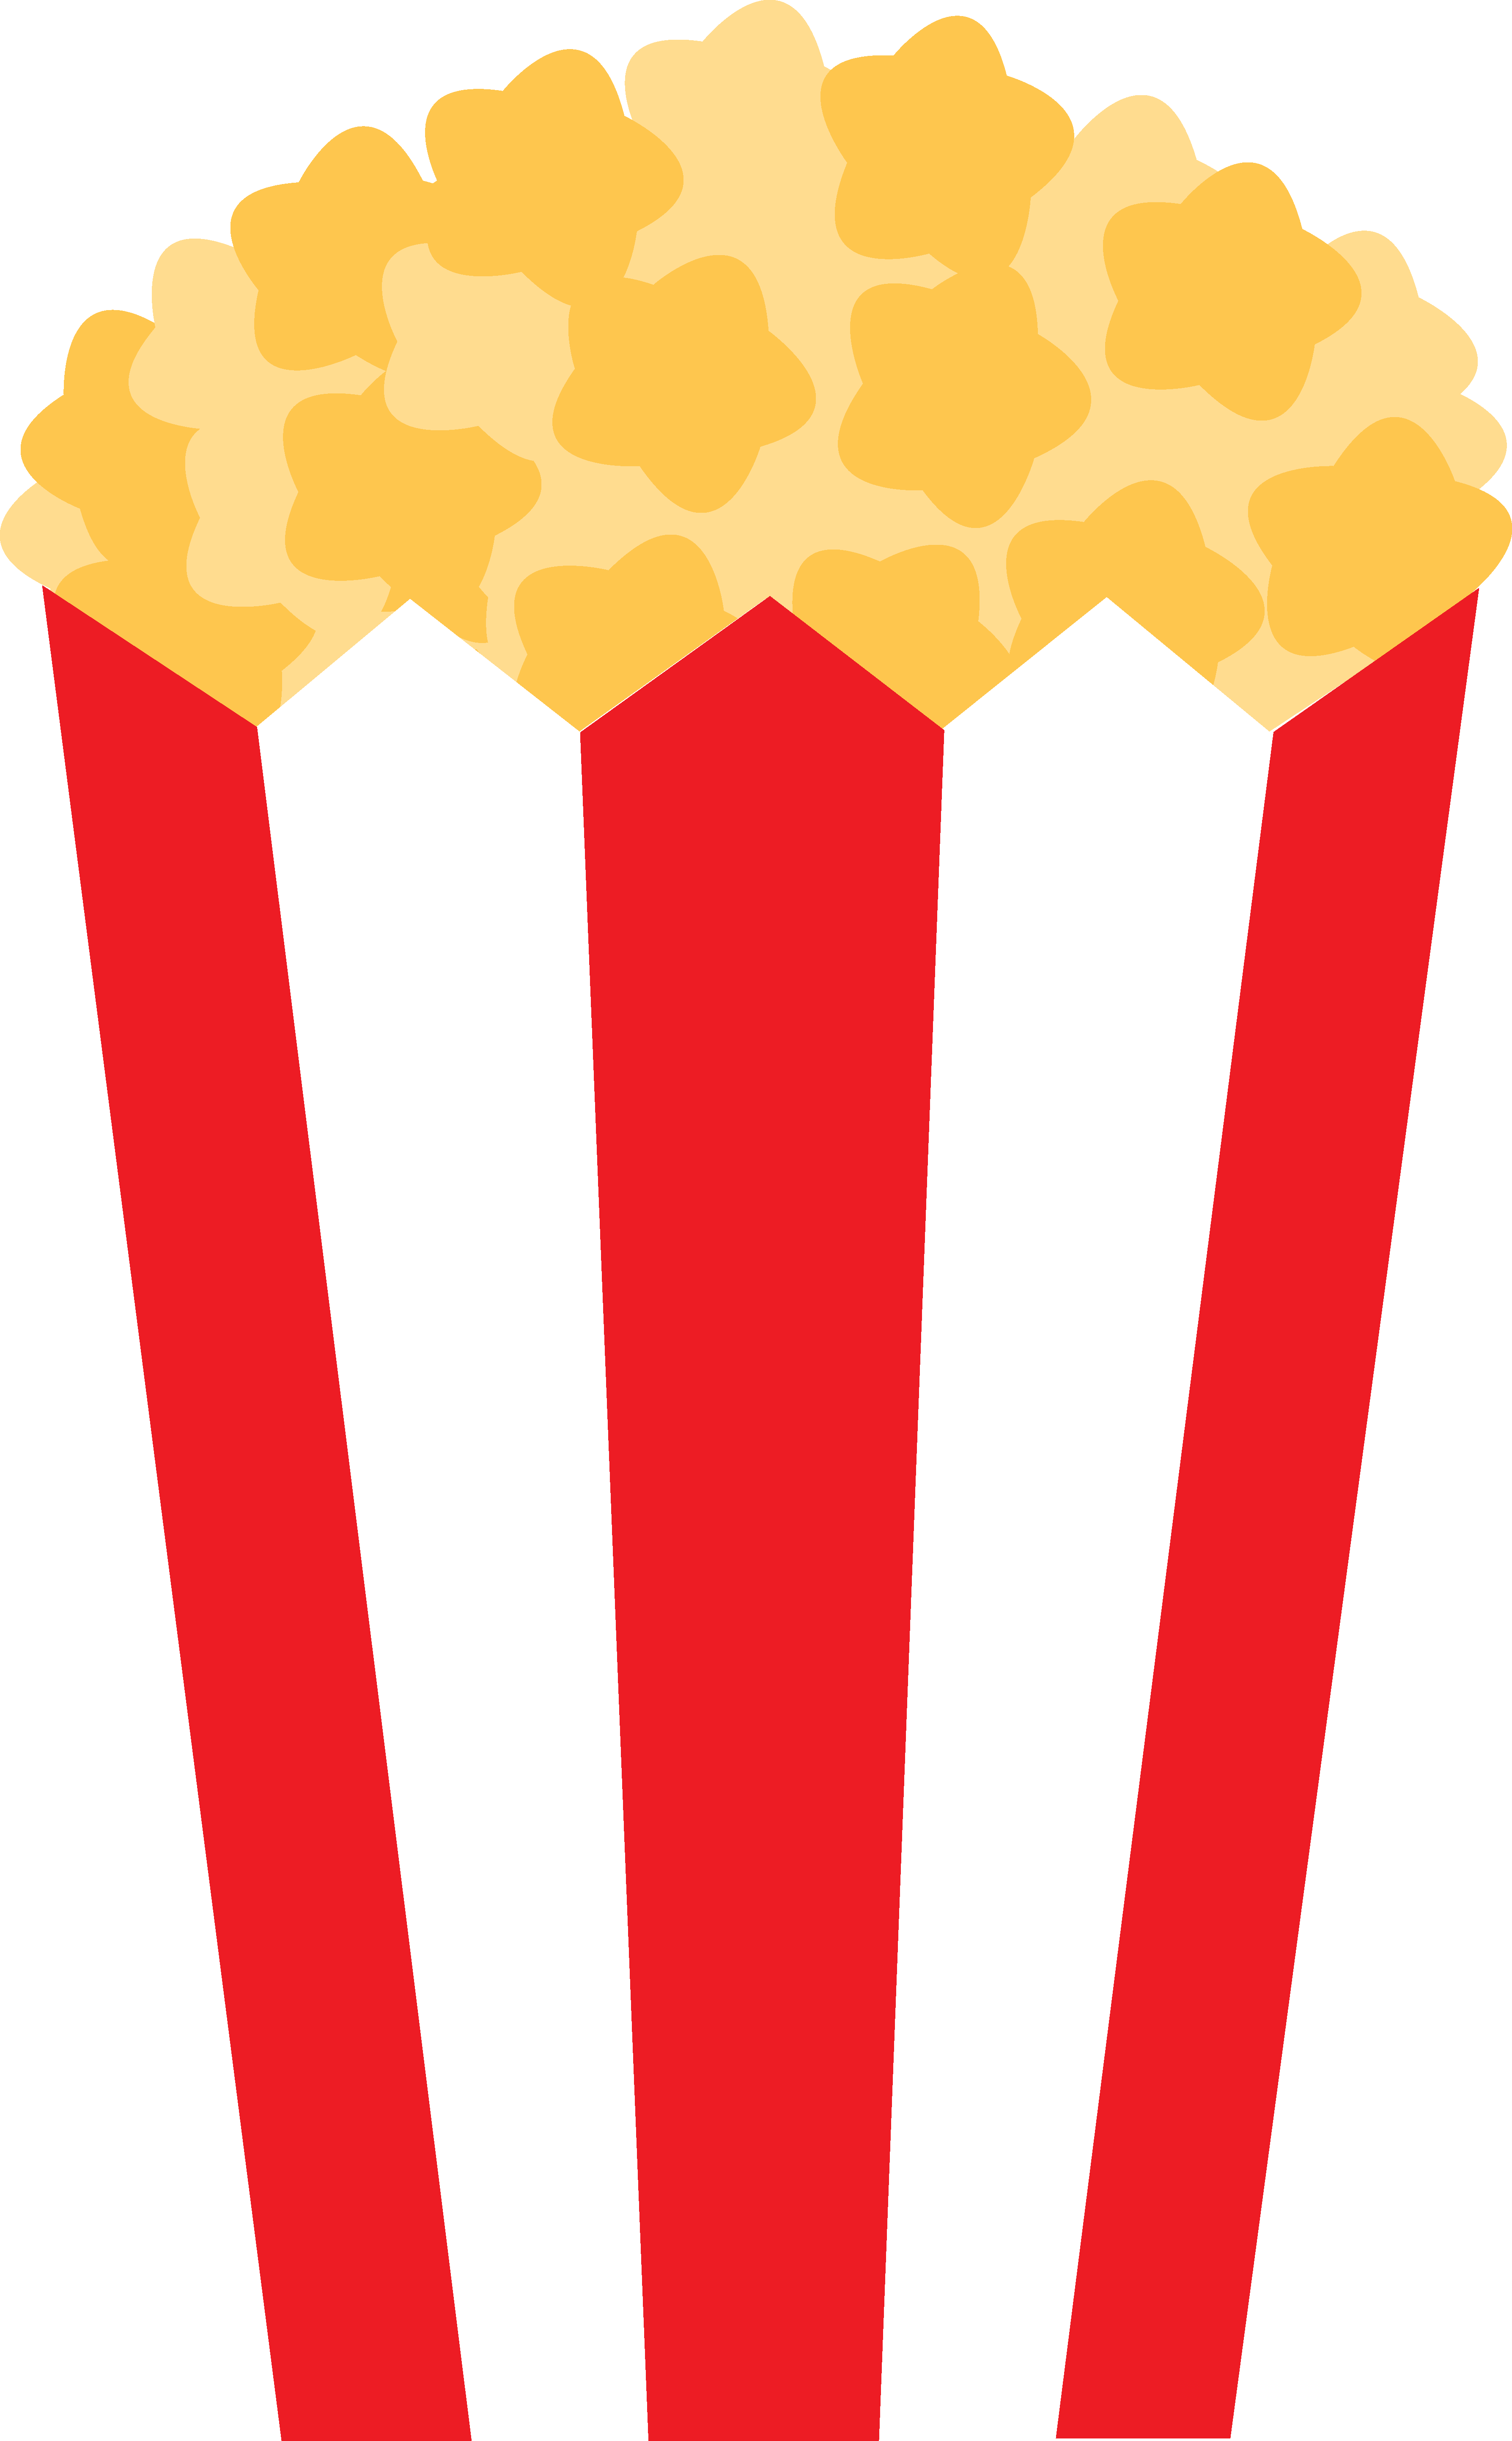 Popcorn Border Images Free Download Clipart